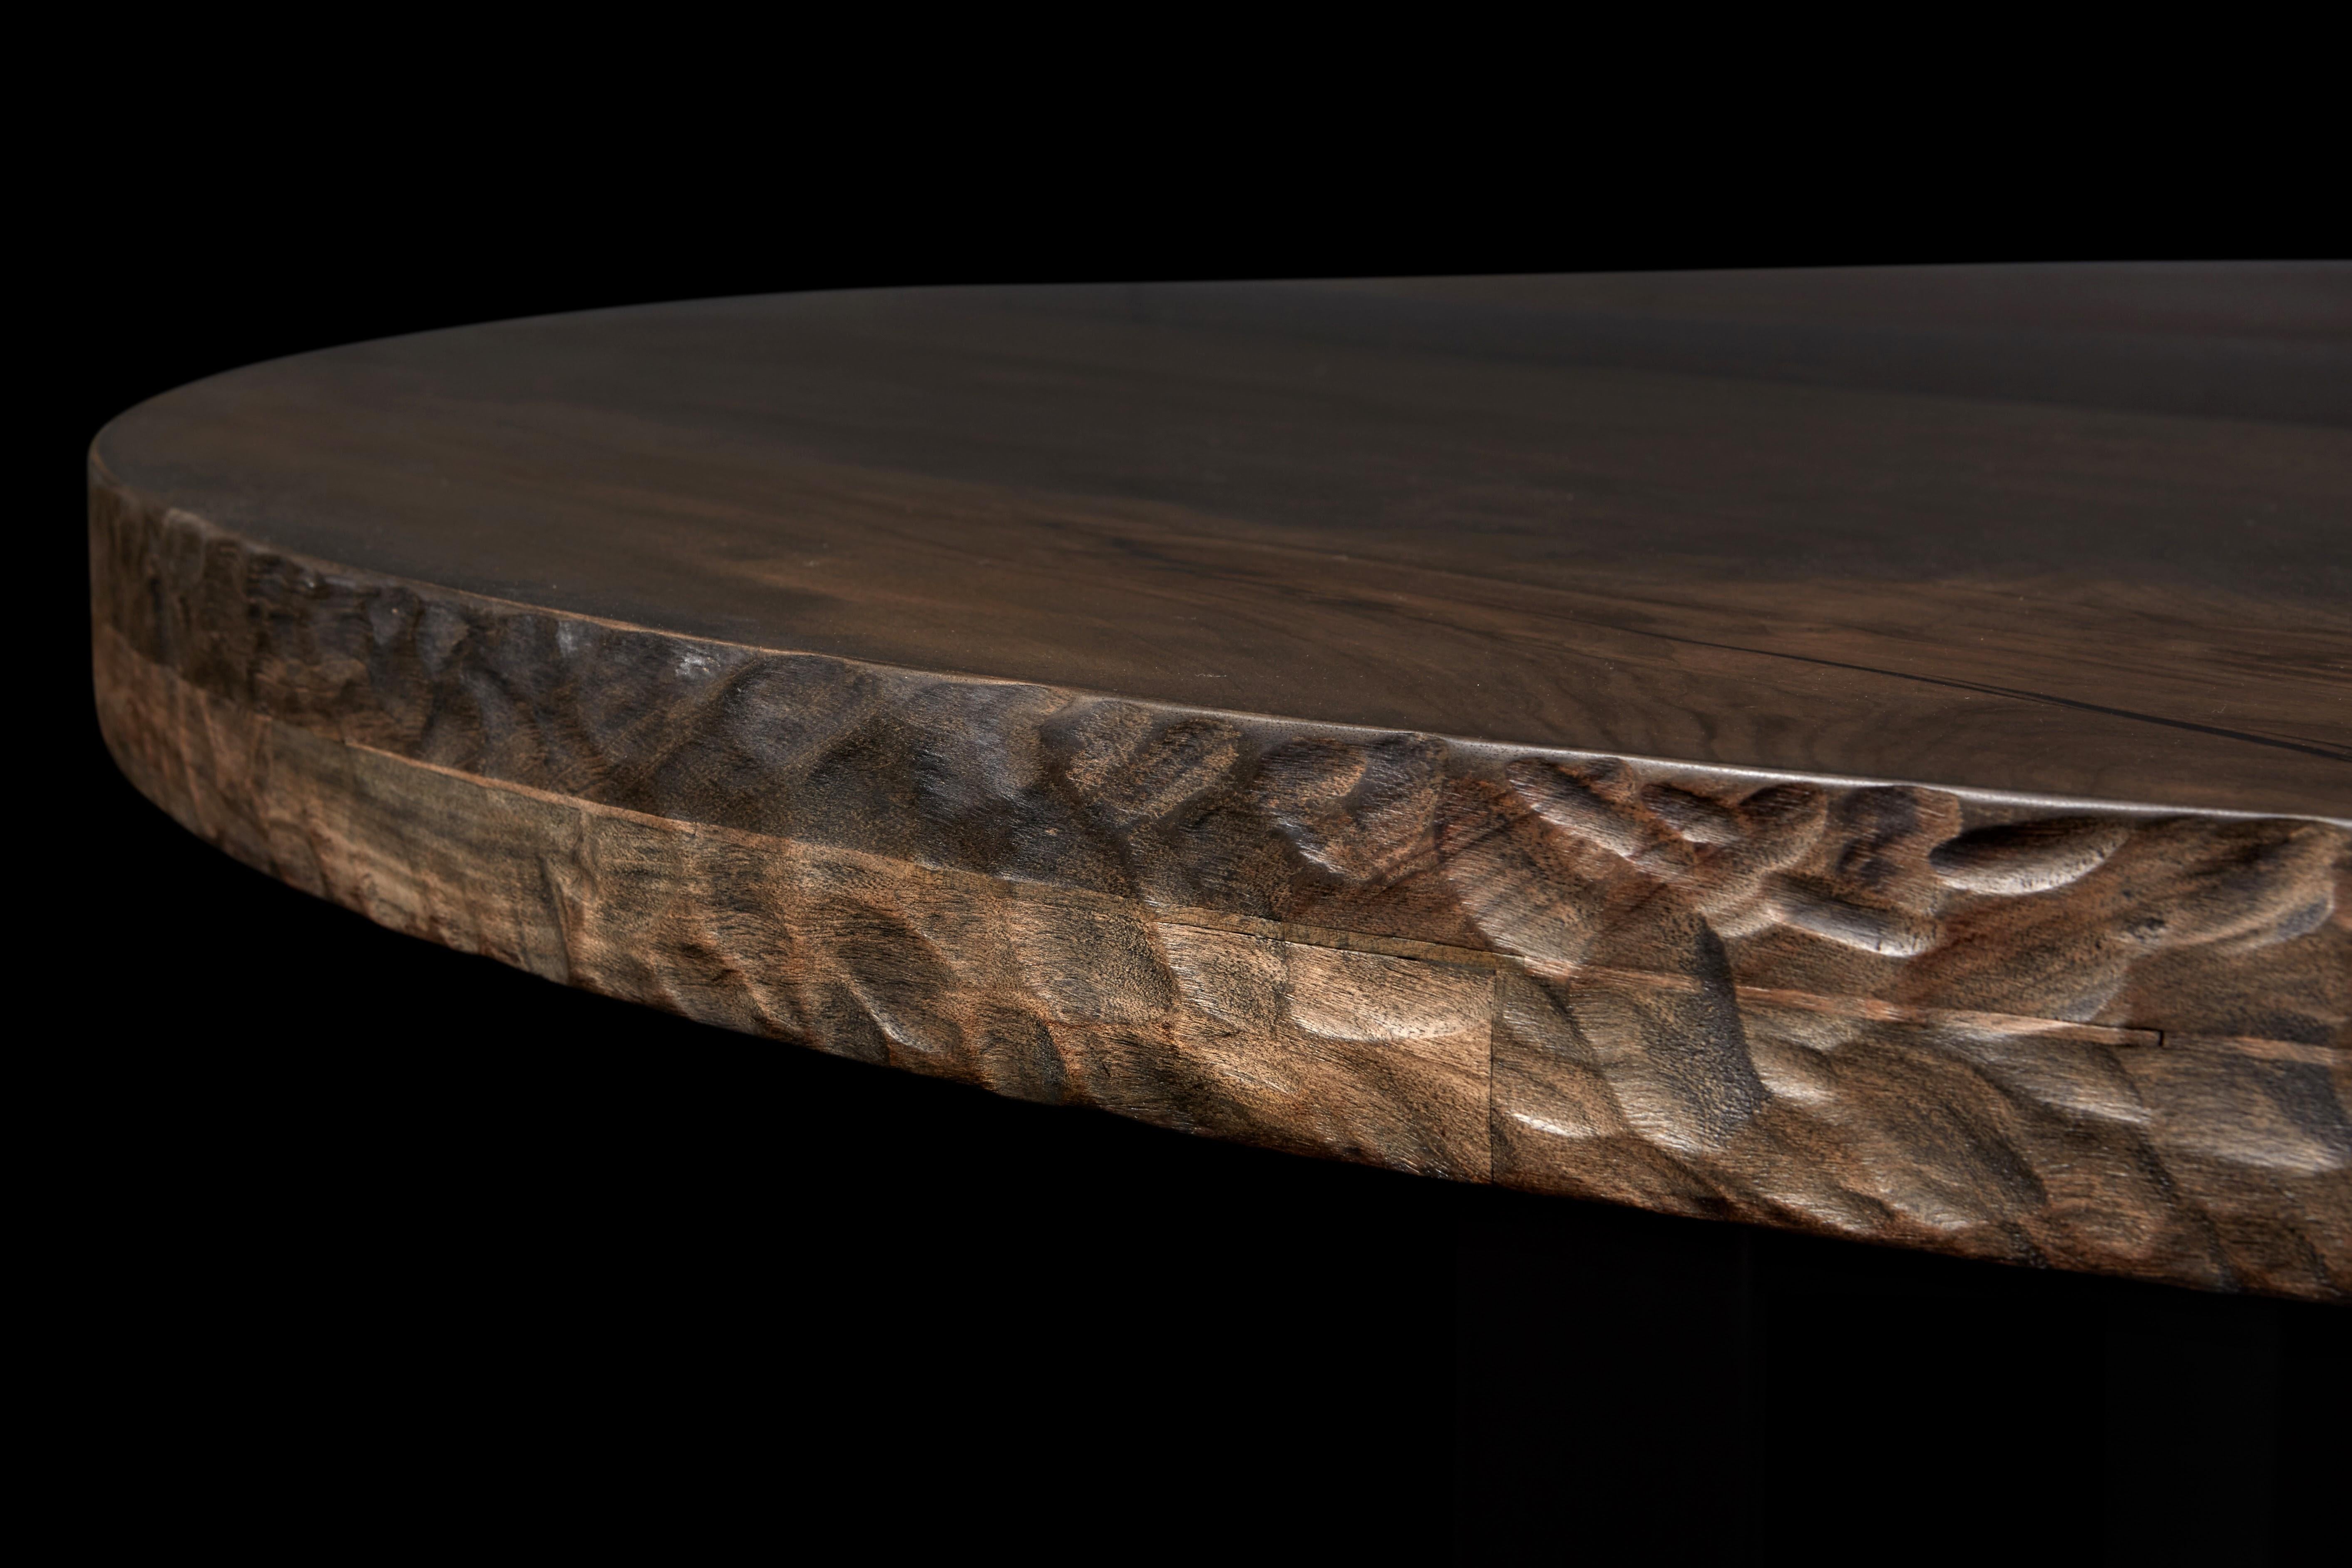 Contemporary Bronze Leg and English Walnut Round Table. by Jonathan Field.